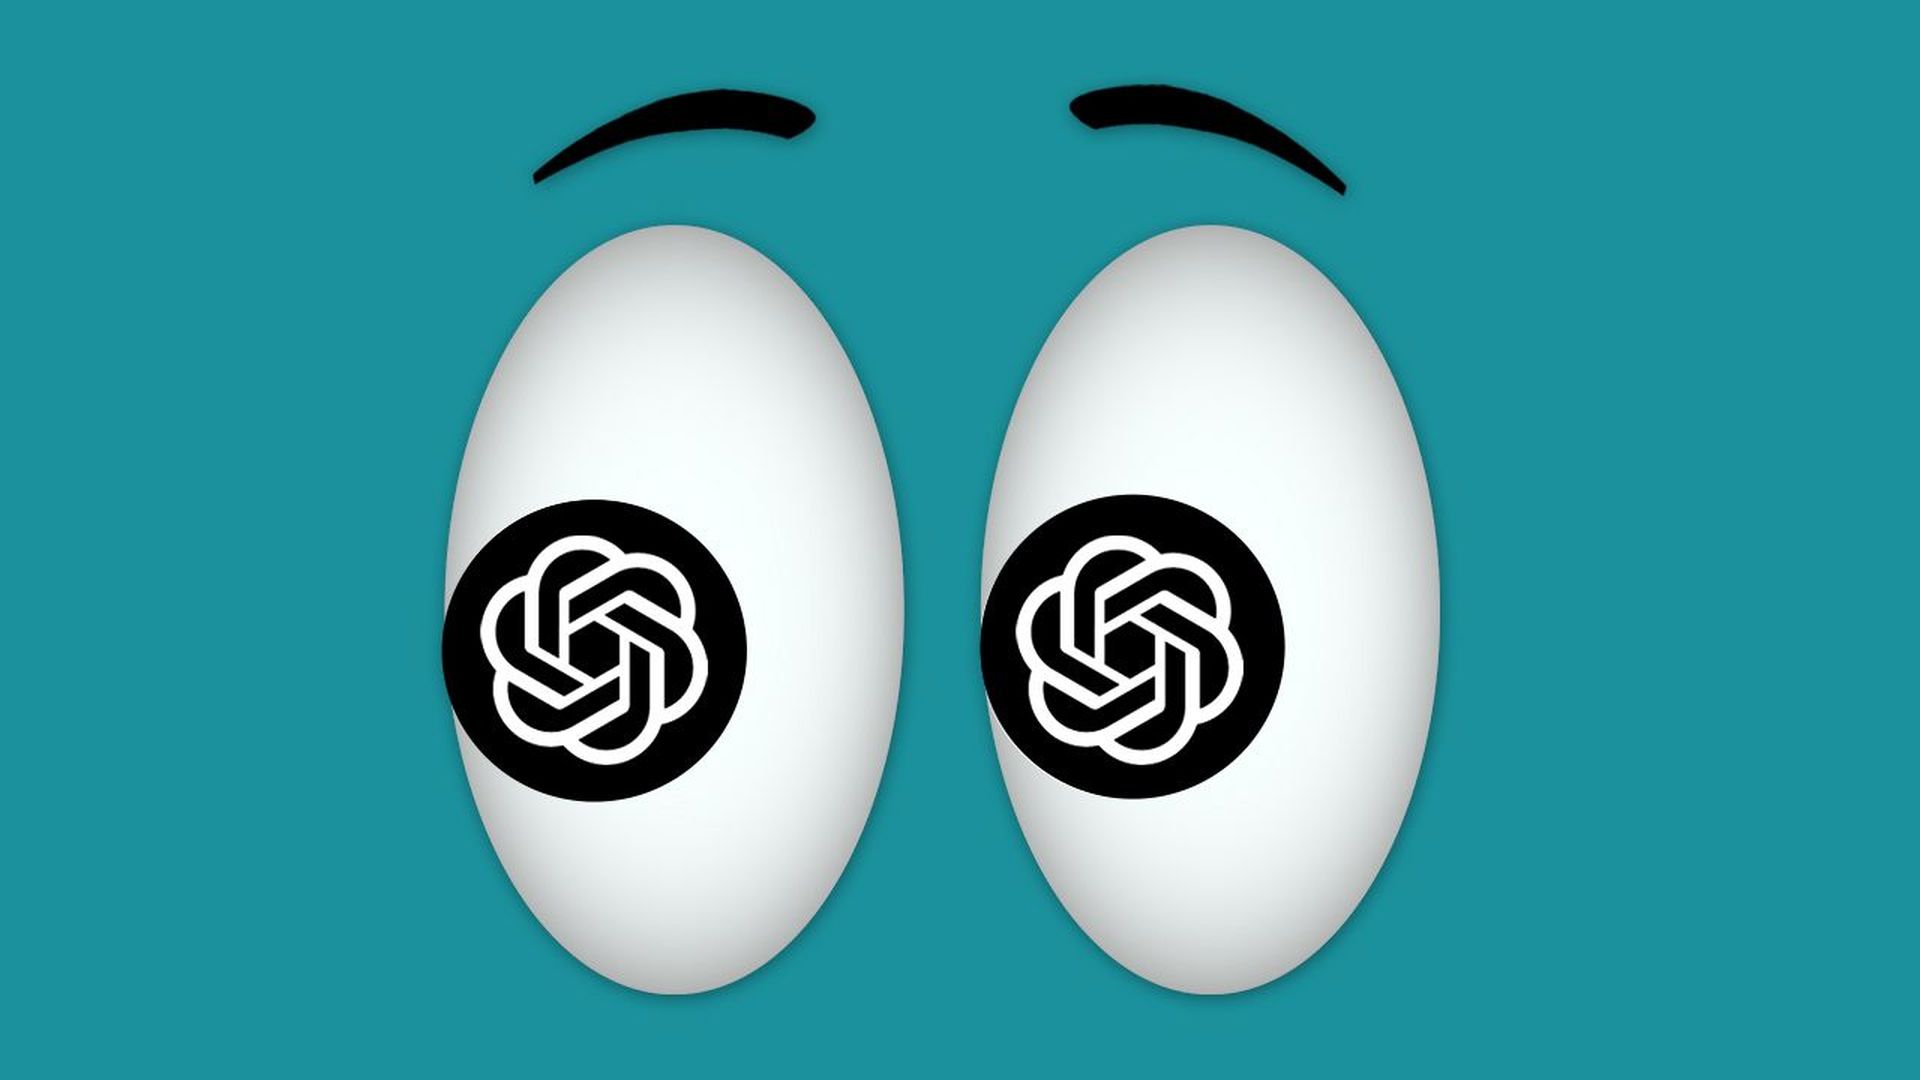 Illustration of eye emojis with the OpenAI logo in the pupil